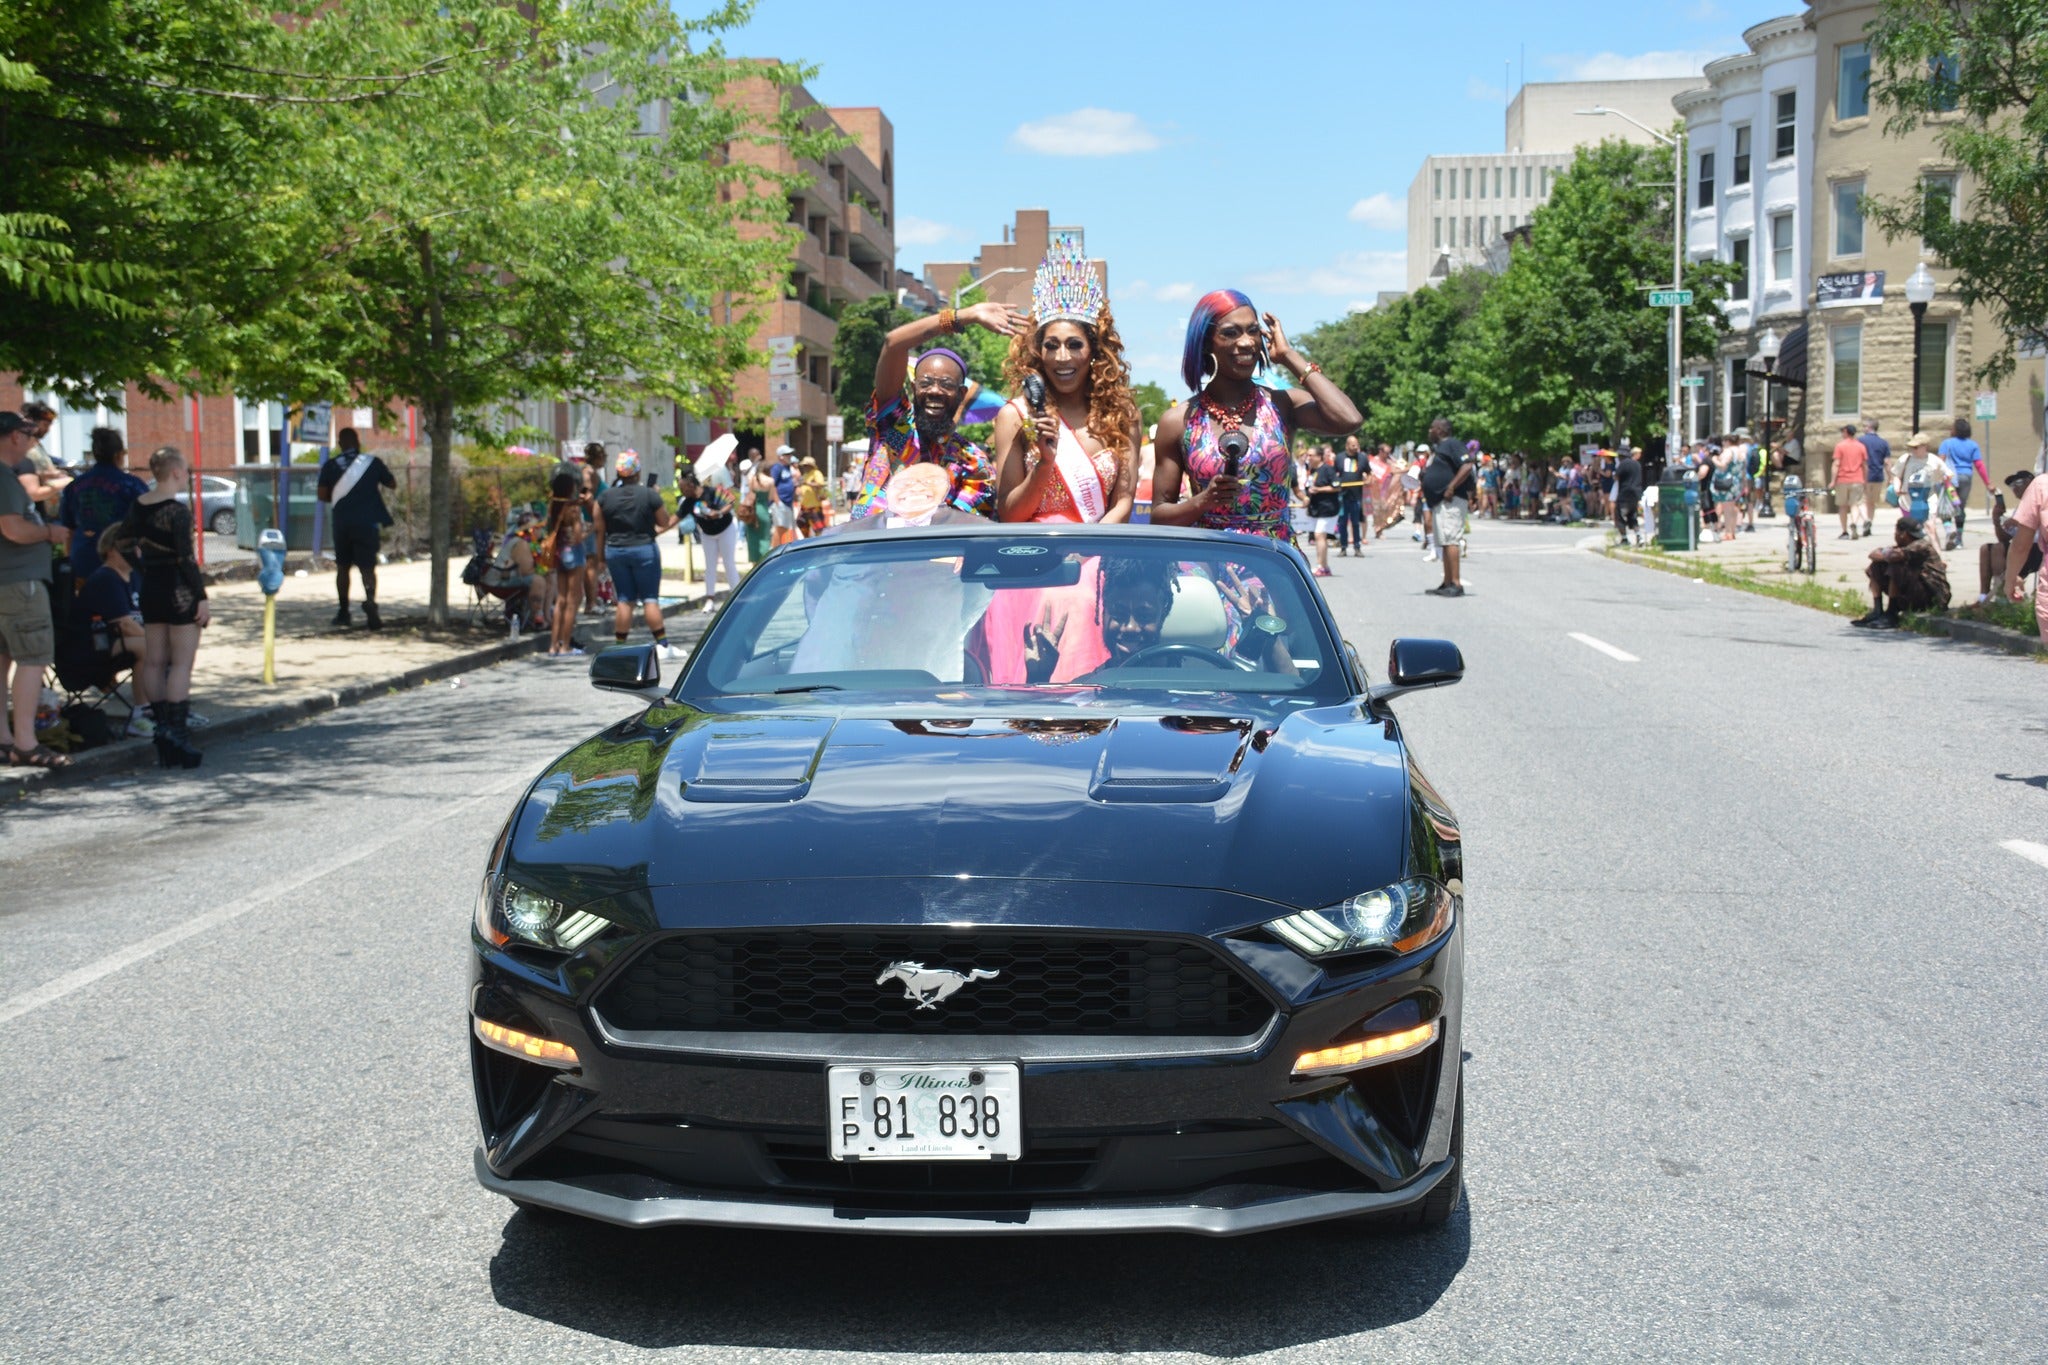 Many gathered in Baltimore for the annual Pride parade and block party on Saturday. The event ended early after the mass panic.